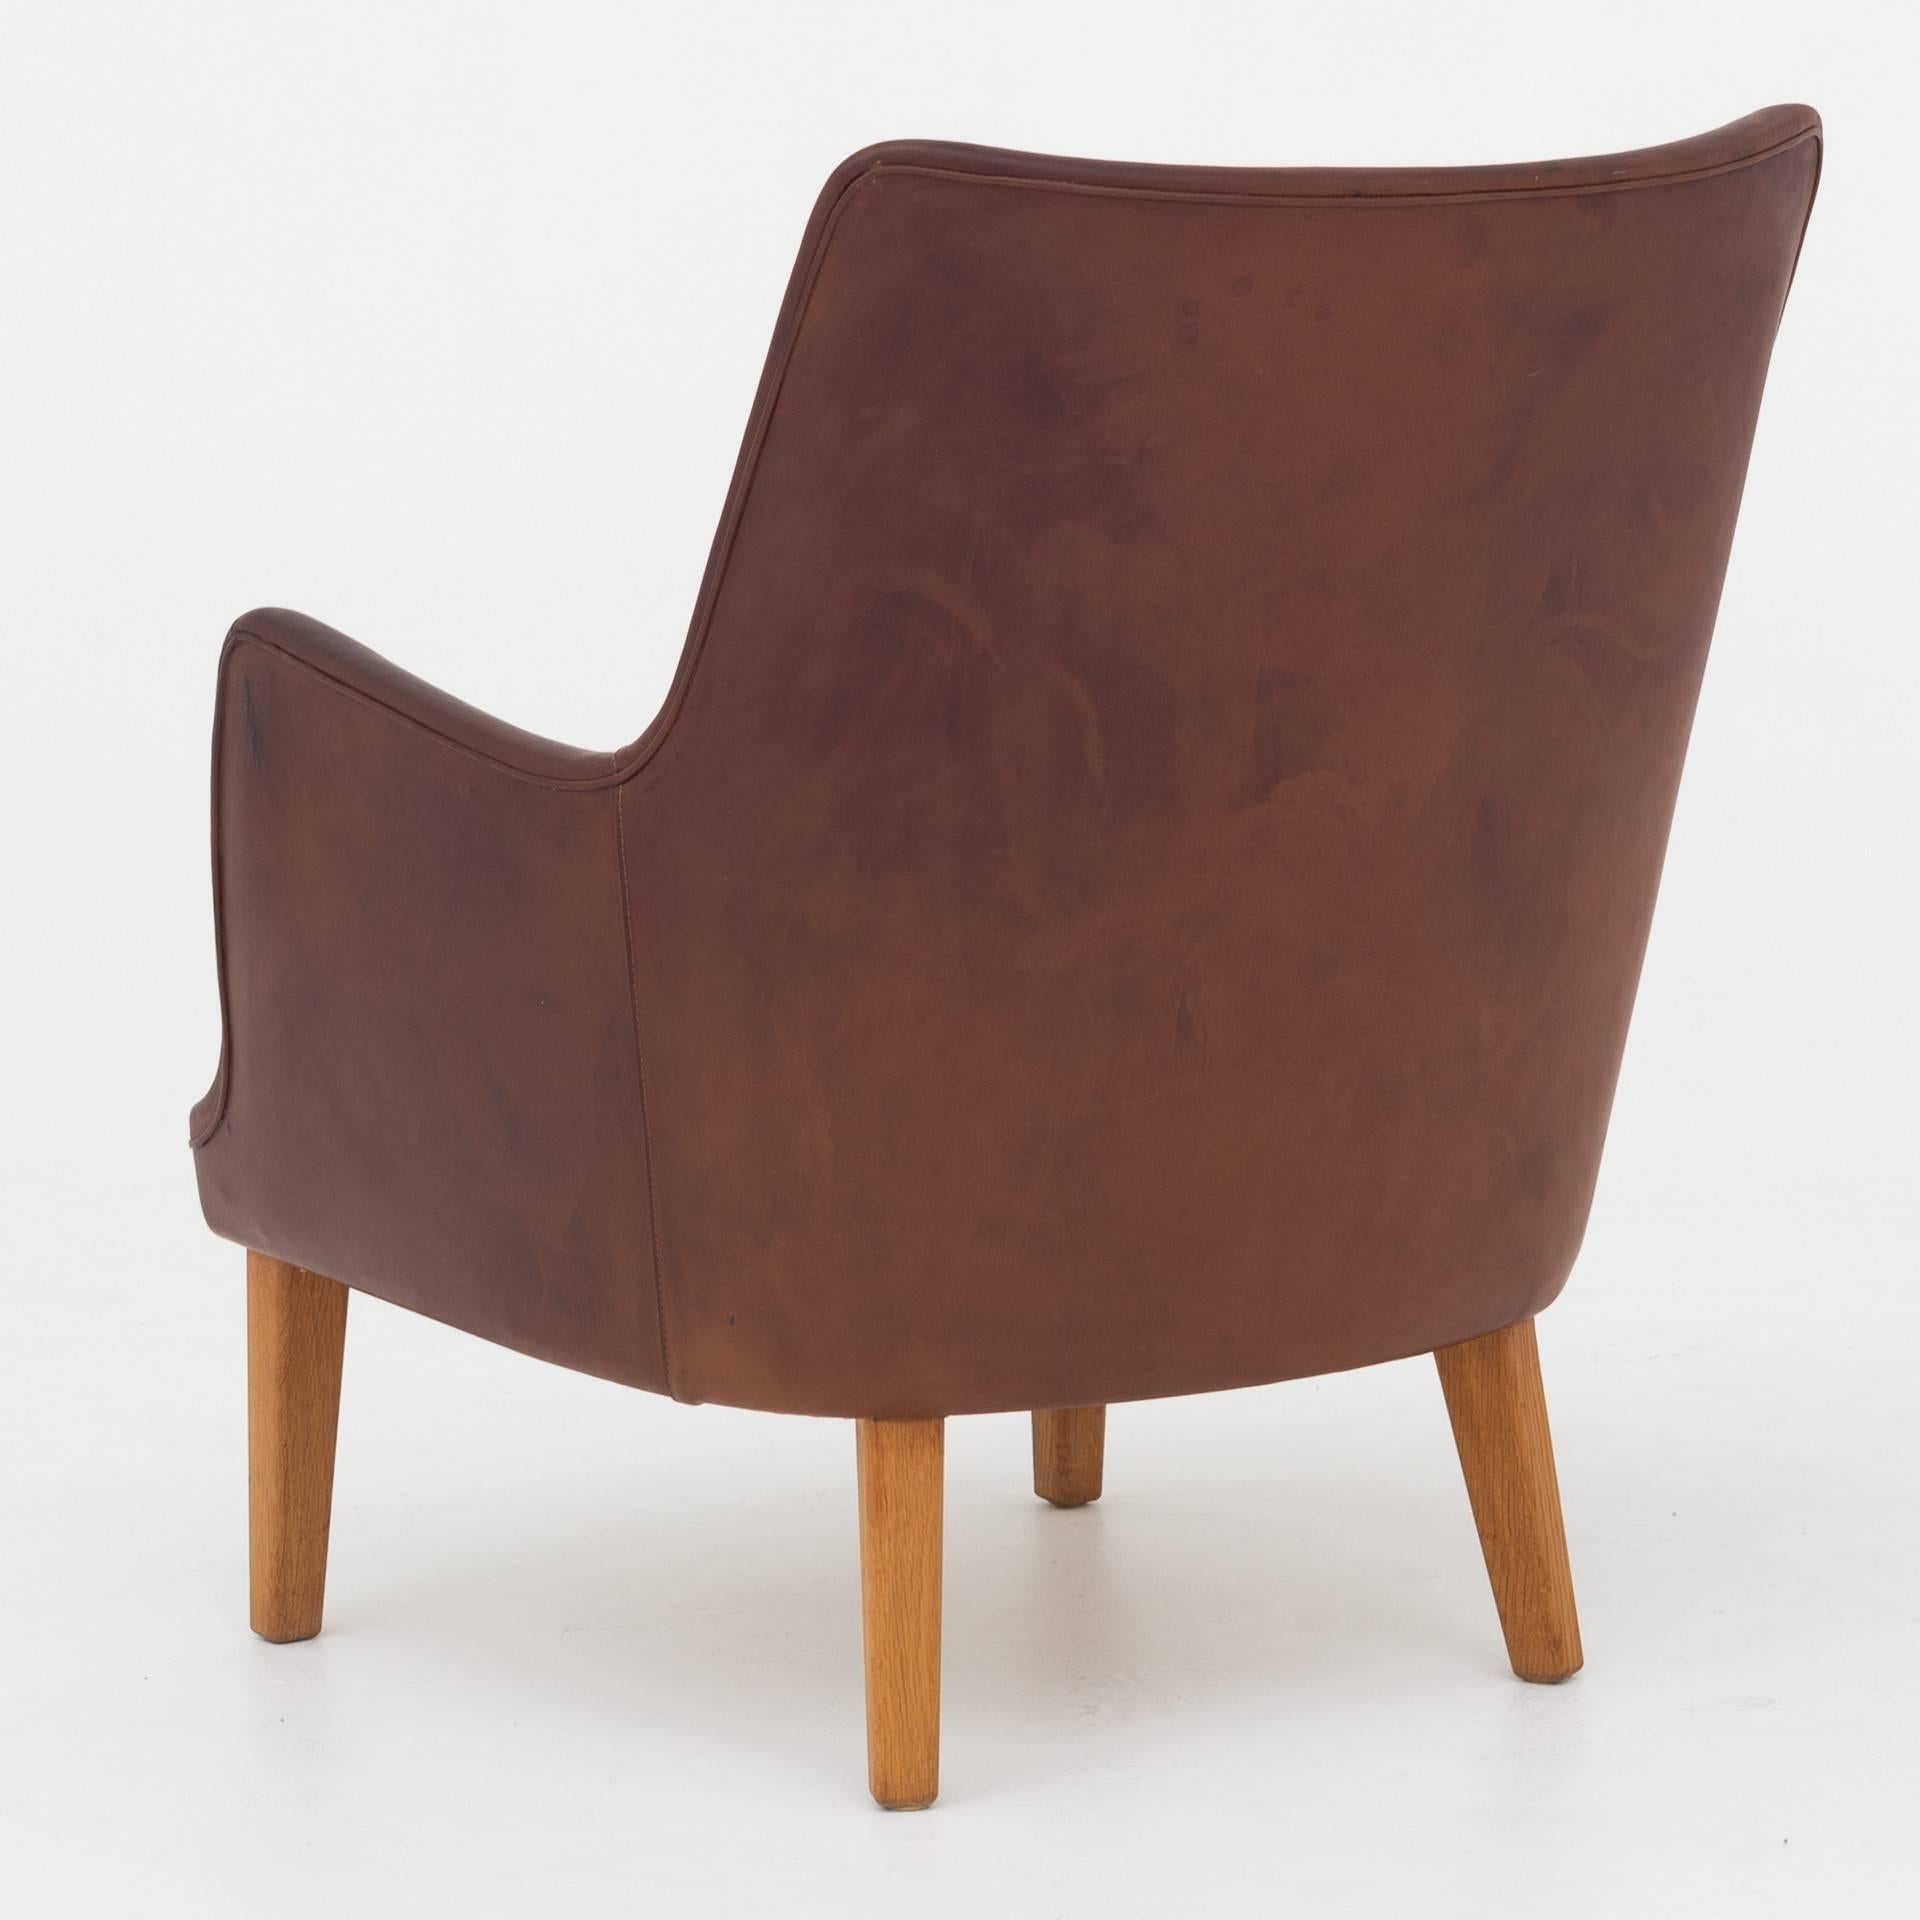 Easy chair by Arne Vodder with oak legs and patinated brown leather. Maker Ivan Schlechter.